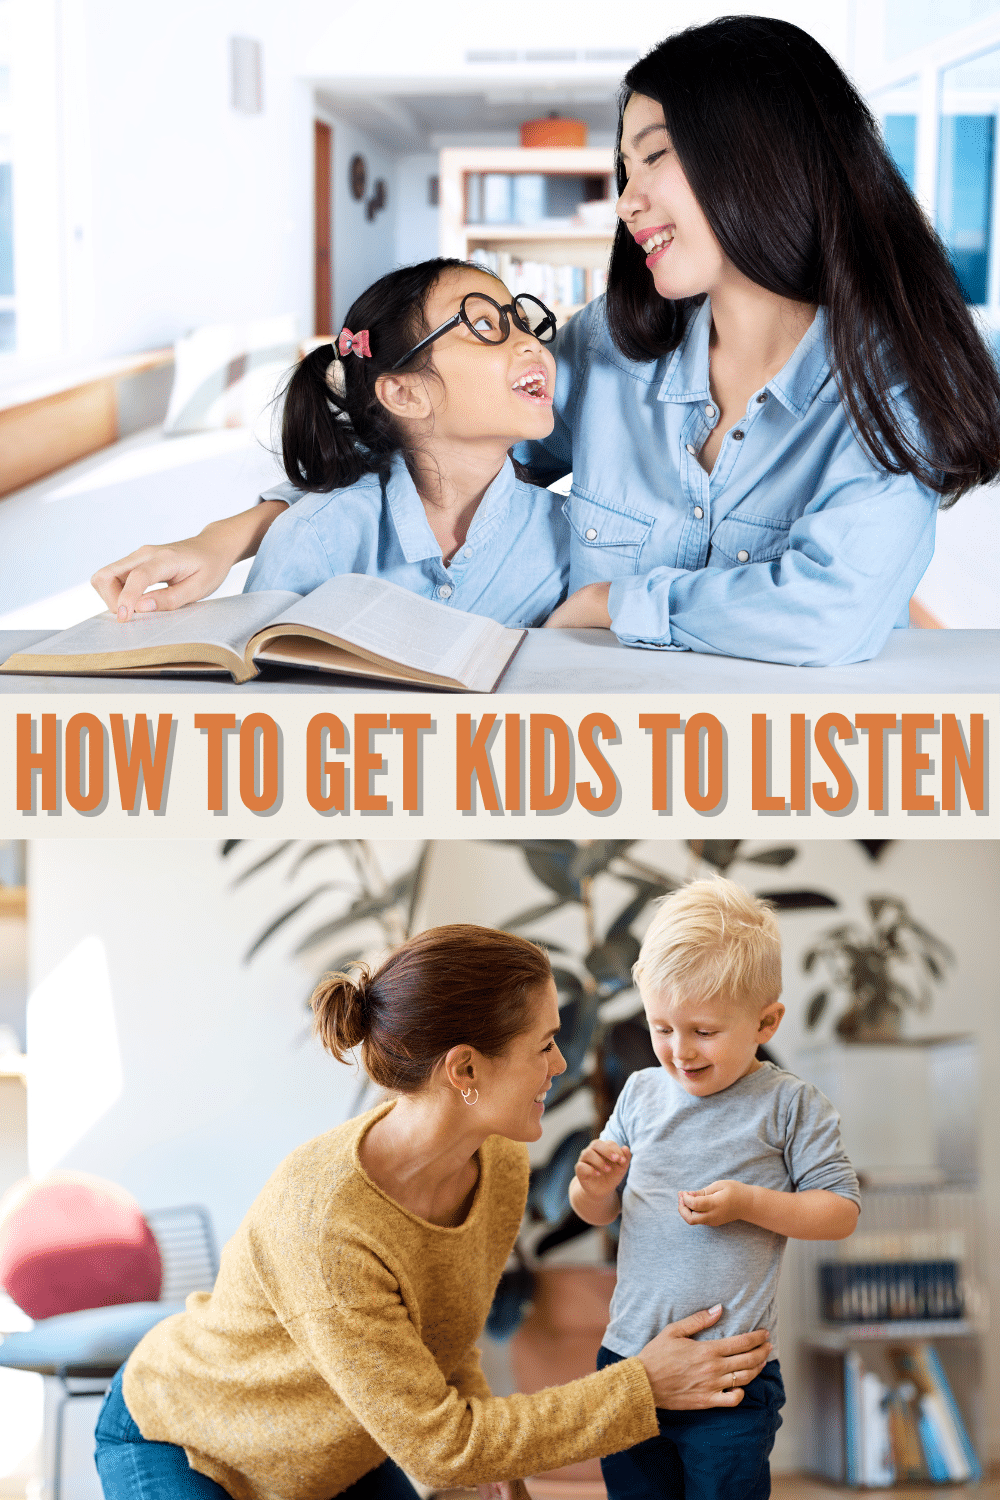 Simple, practical strategies that work! Learn how to get kids to listen without yelling by using these easy to understand techniques. #parenting #childbehavior via @wondermomwannab